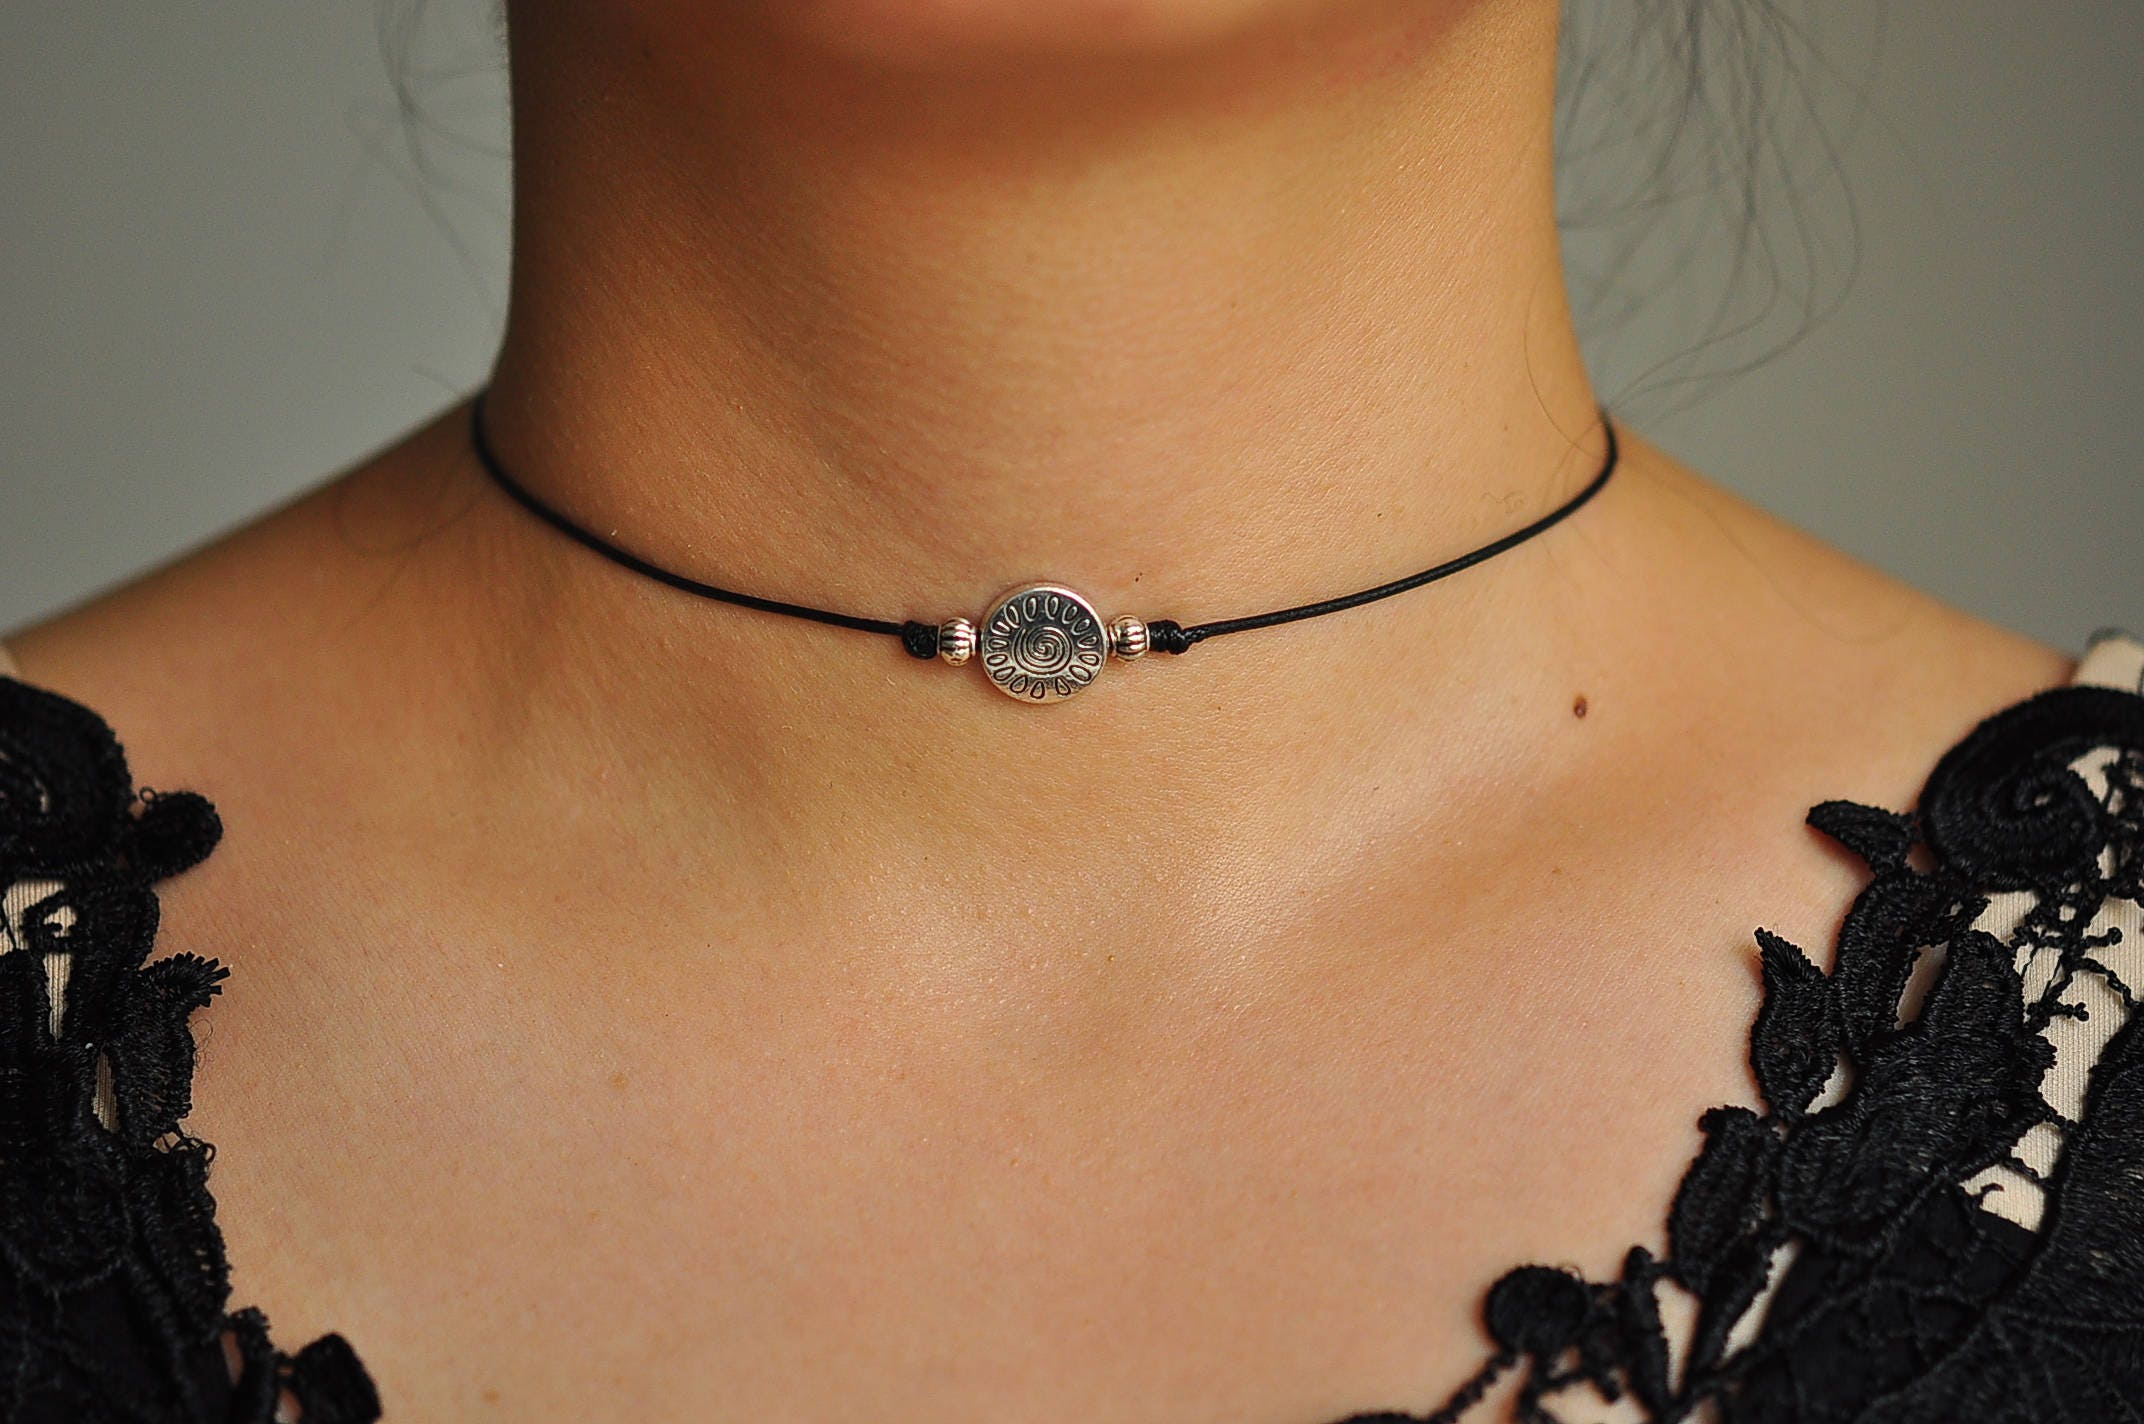 Black Leather With Silver Charm Choker Necklace. Hippie 90s | Etsy